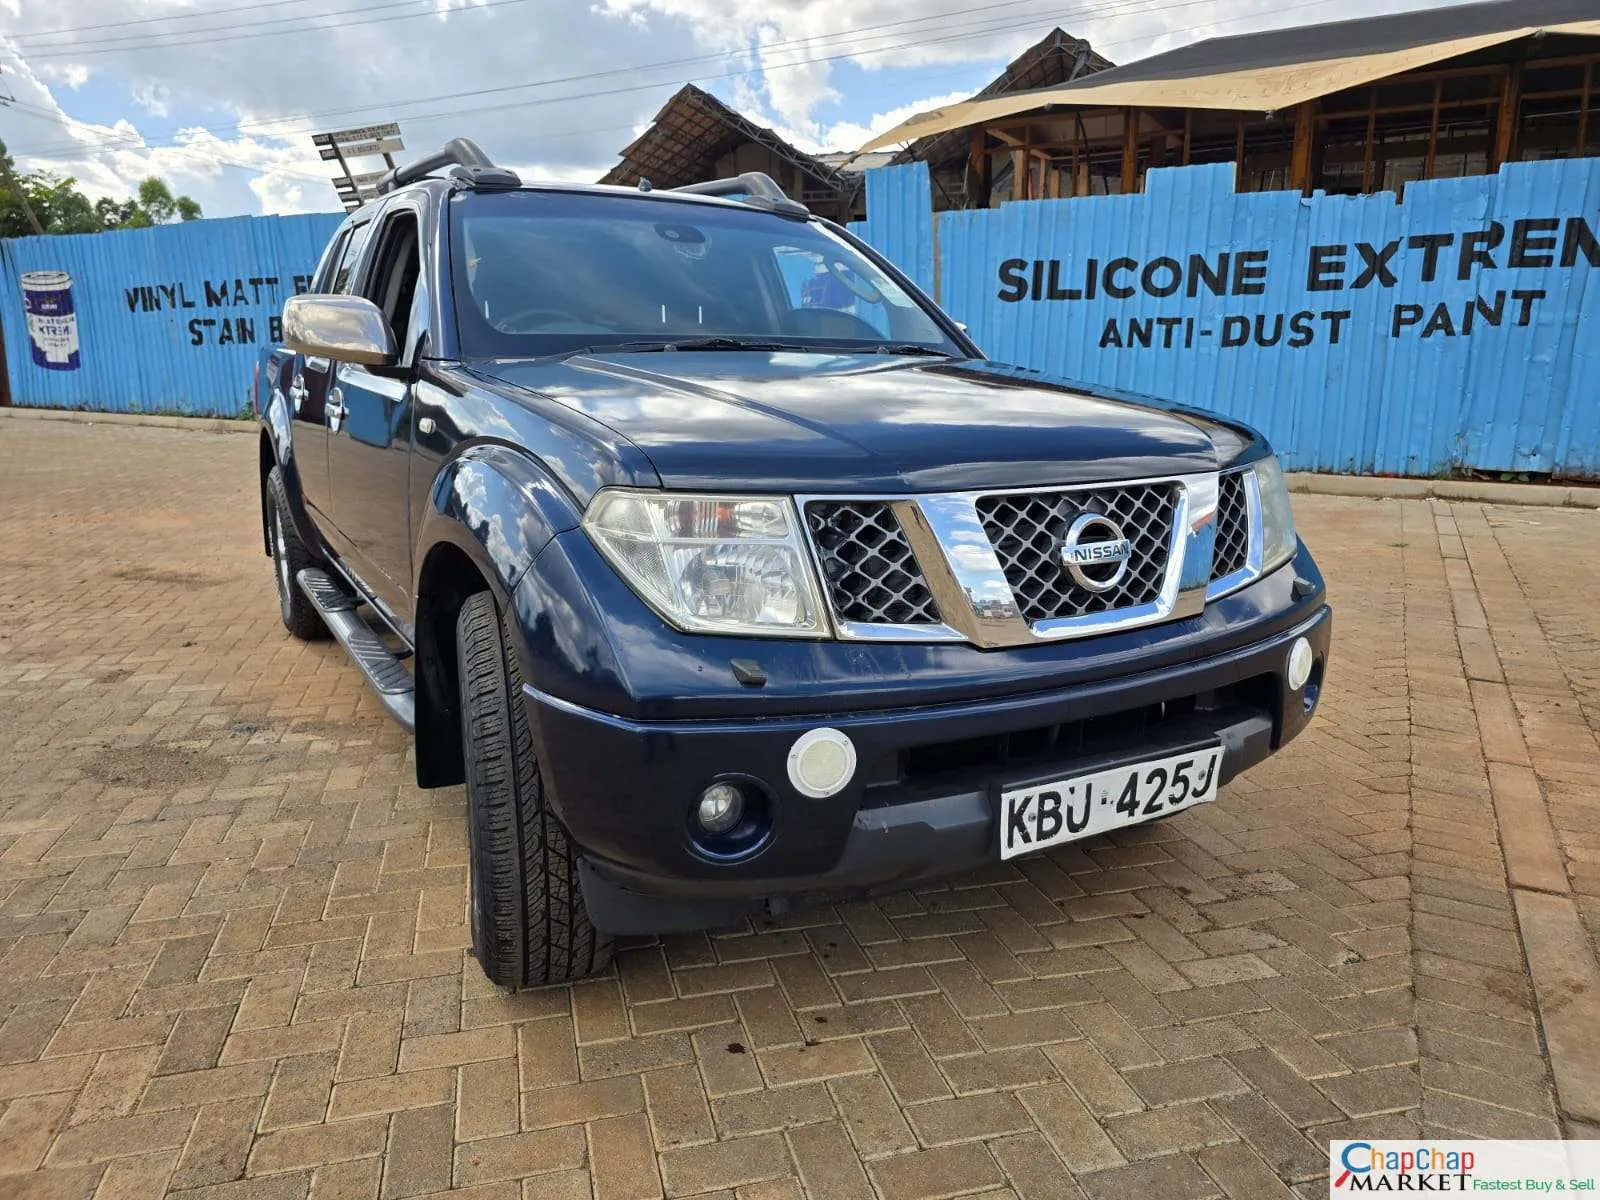 Nissan Navara Double cab QUICK SALE You Paul 40% Deposit installments trade in OK EXCLUSIVE